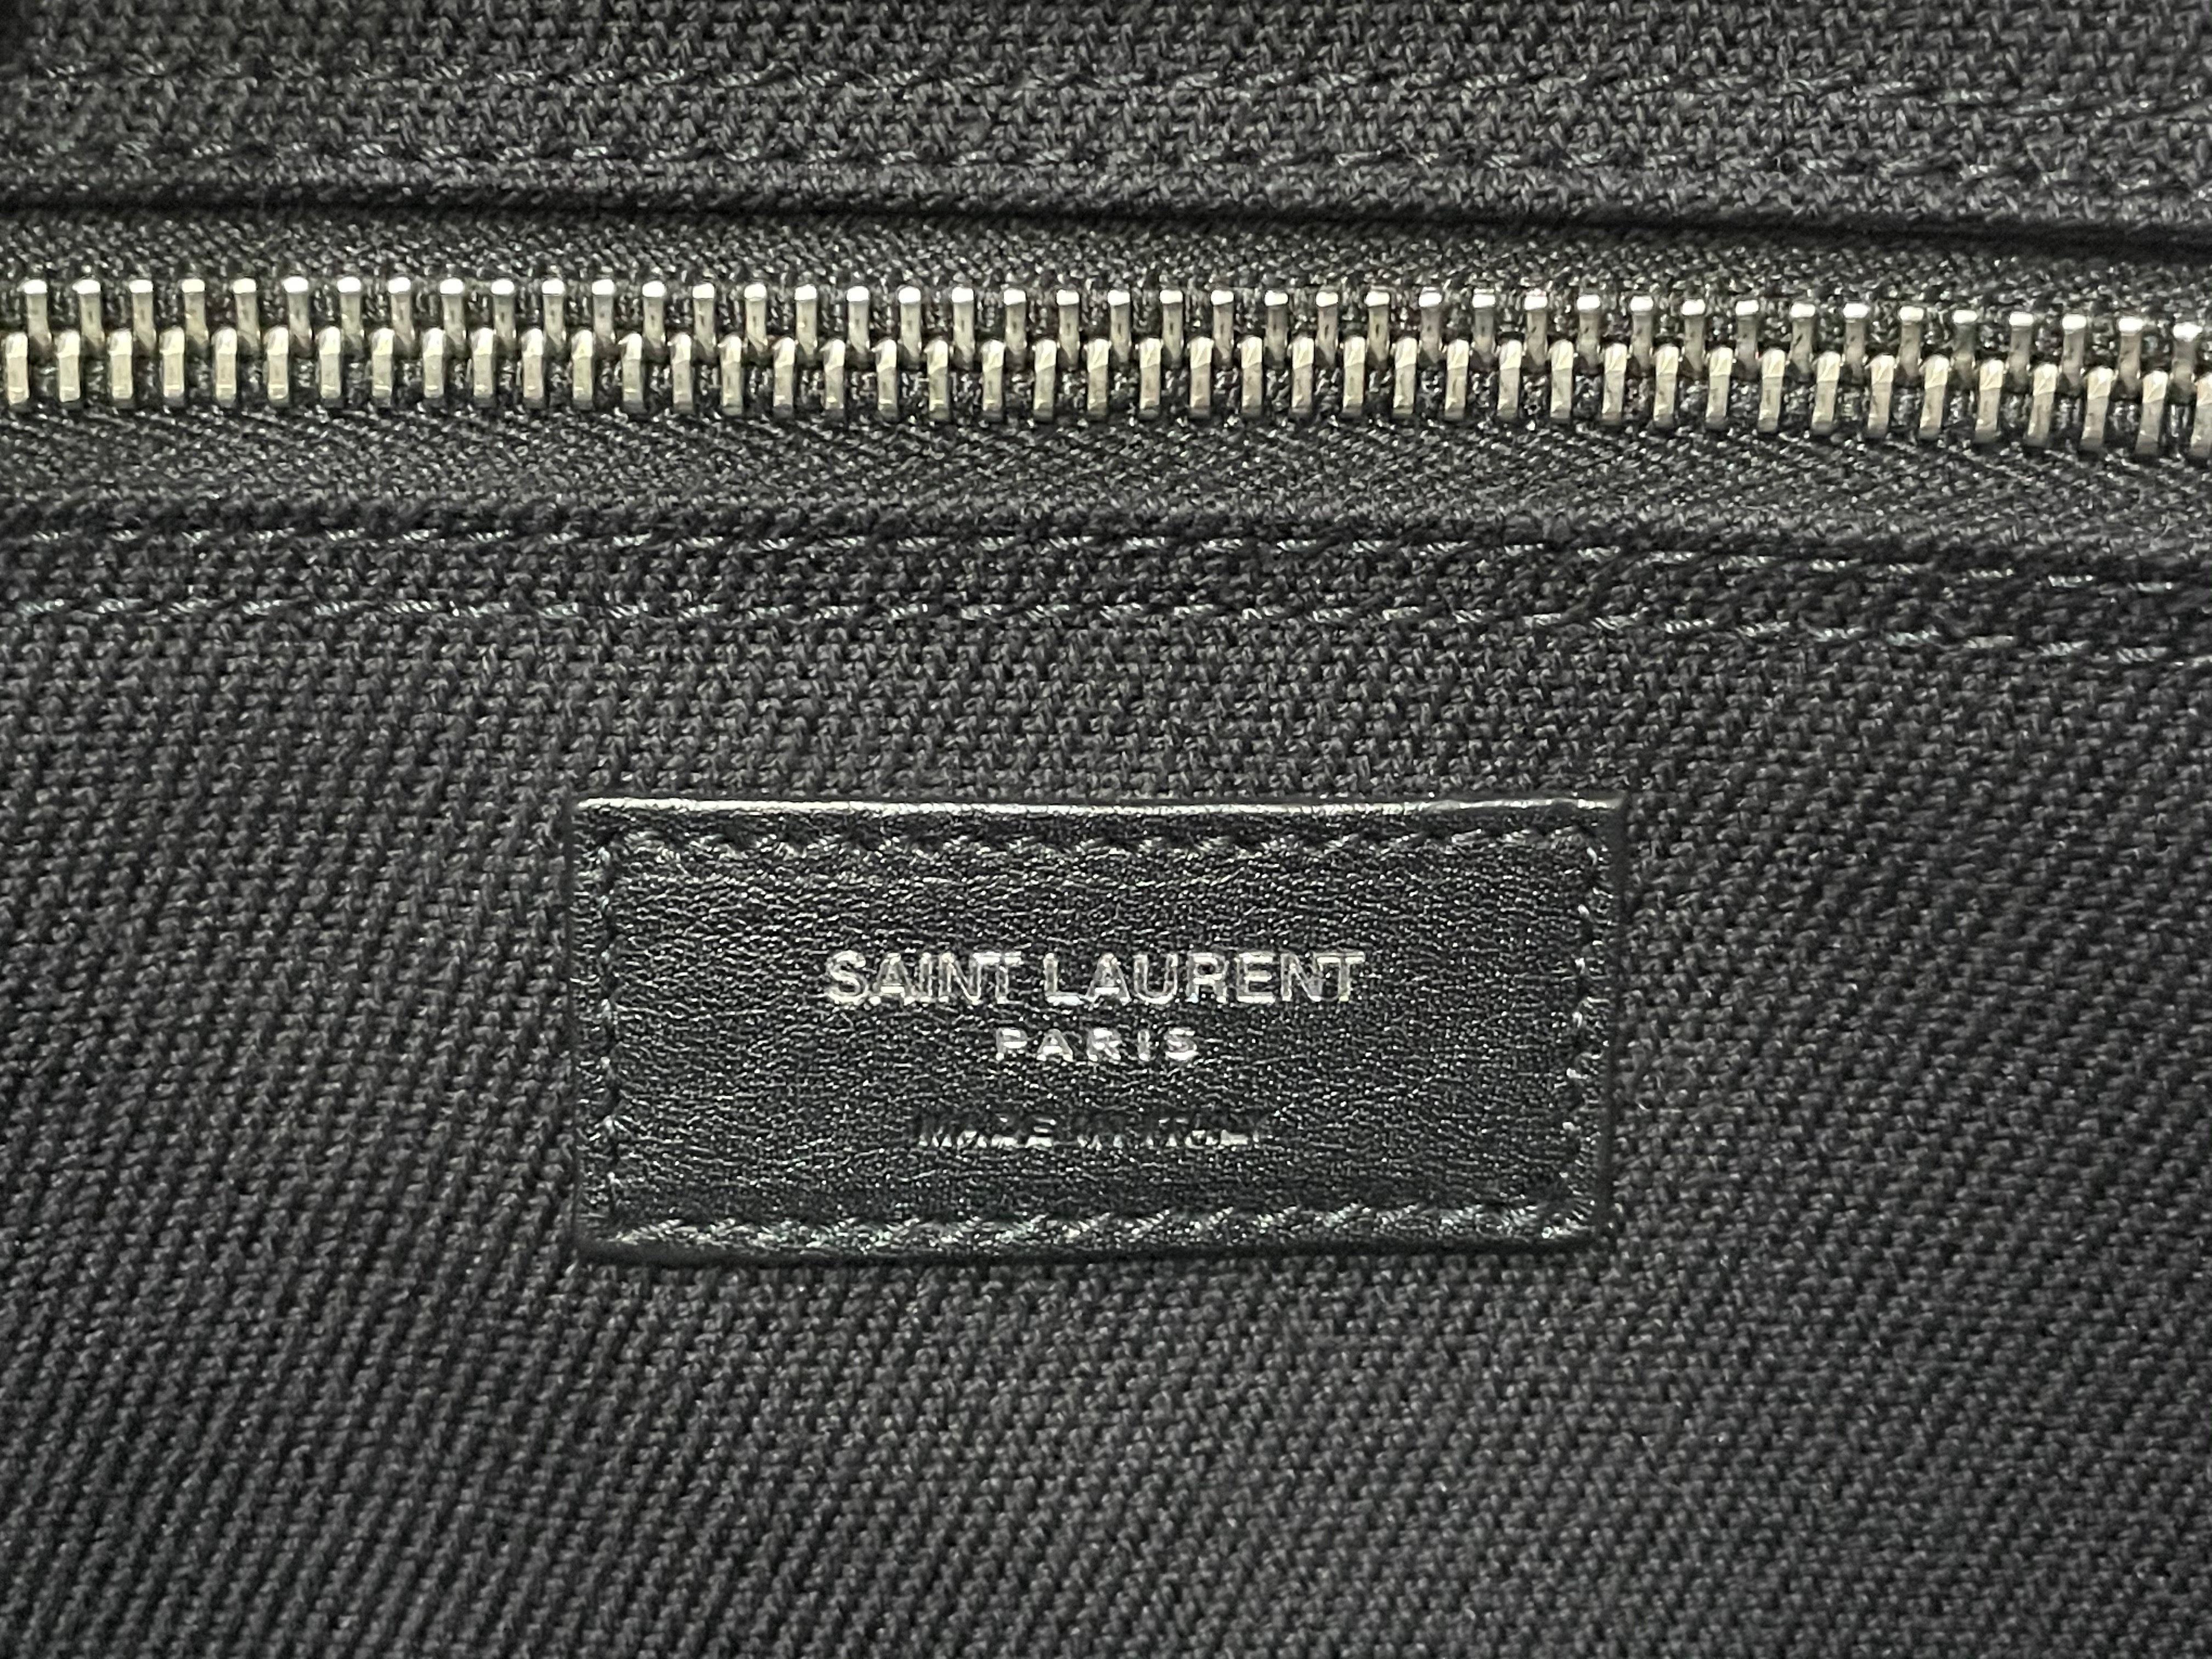 YSL/Saint Laurent Rive Gauche Tote Bag in Great Condition with box and dust  bag